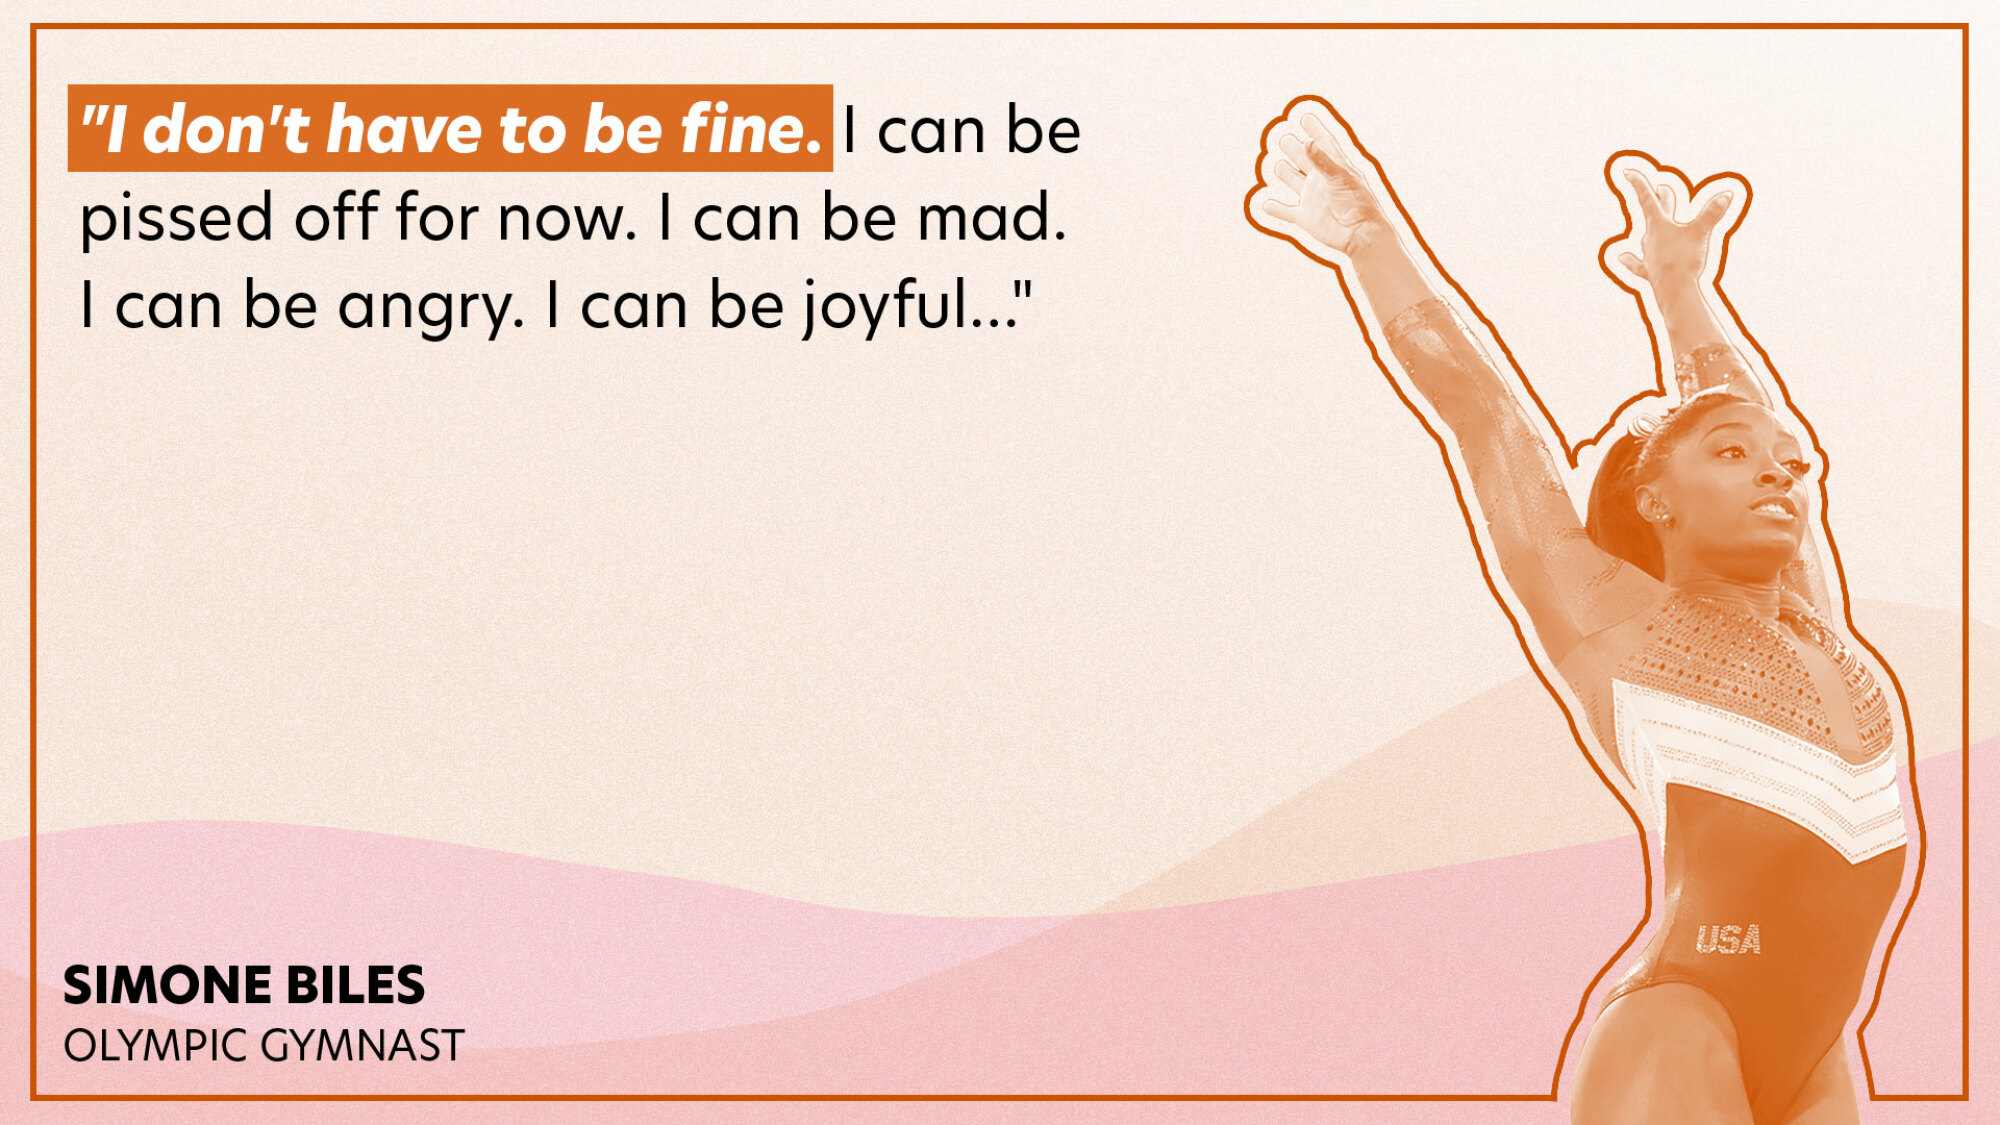 "I don't have to be fine. I can be pissed off for now. I can be mad. I can be angry. I can be joyful…"